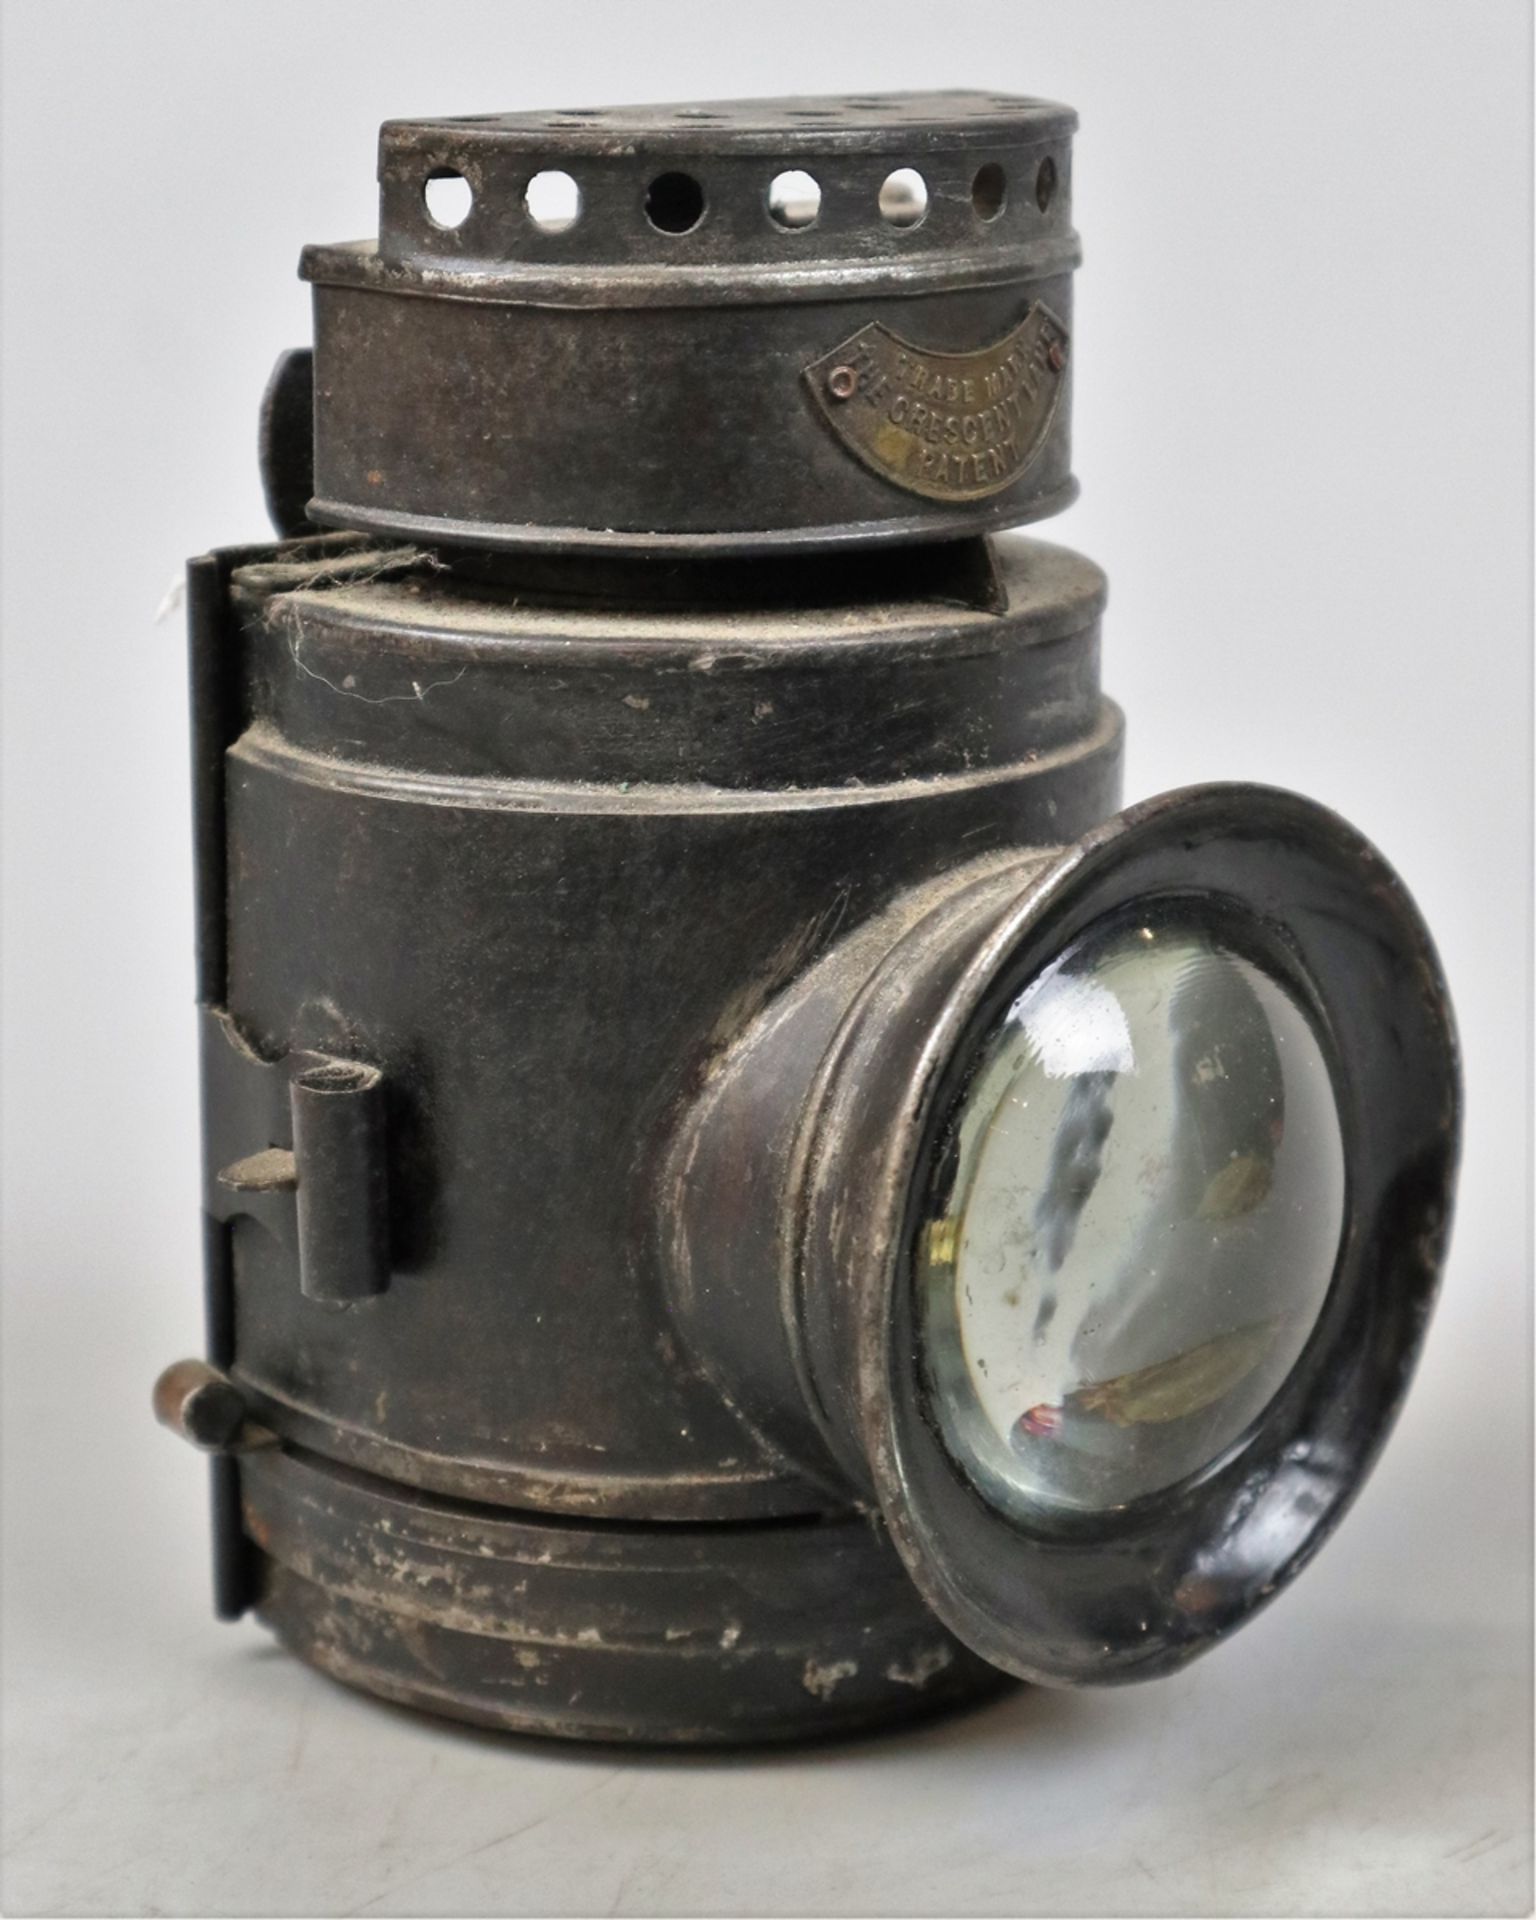 Victorian Dolan & Co. 'The Crescent Lamp' Patent Police Lantern - Image 2 of 5